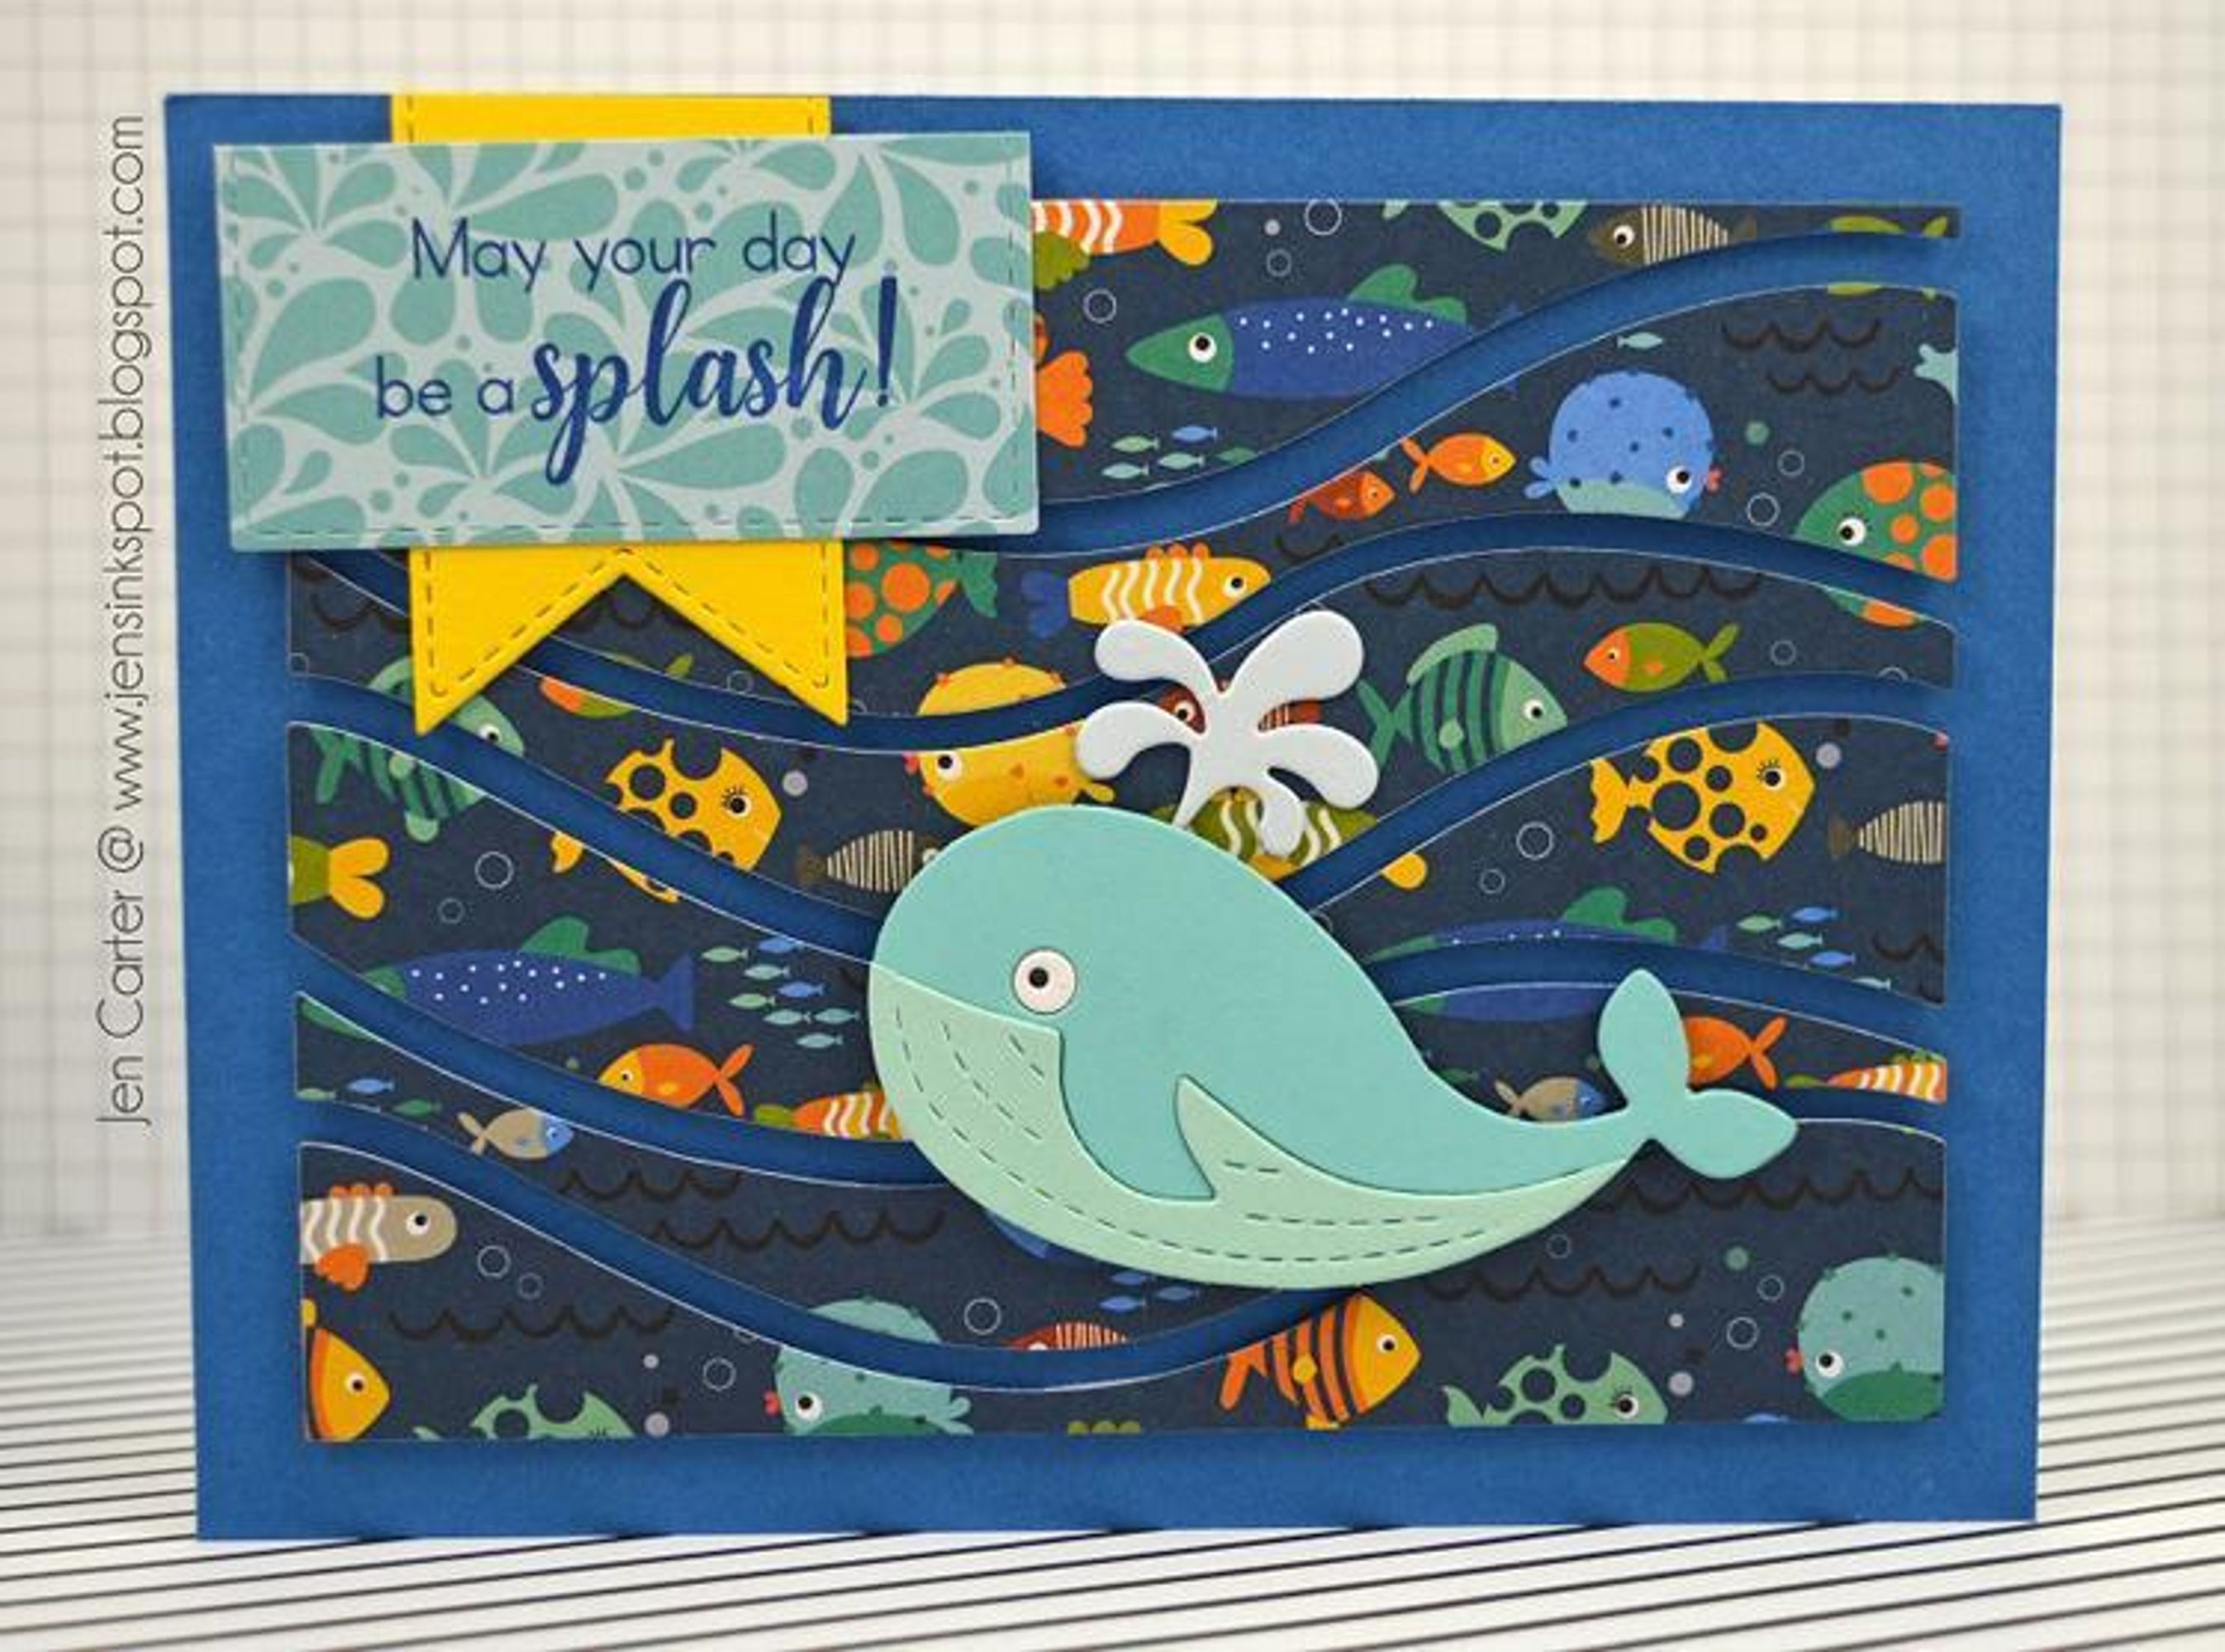 Frantic Stamper Precision Die - Spouting Whale